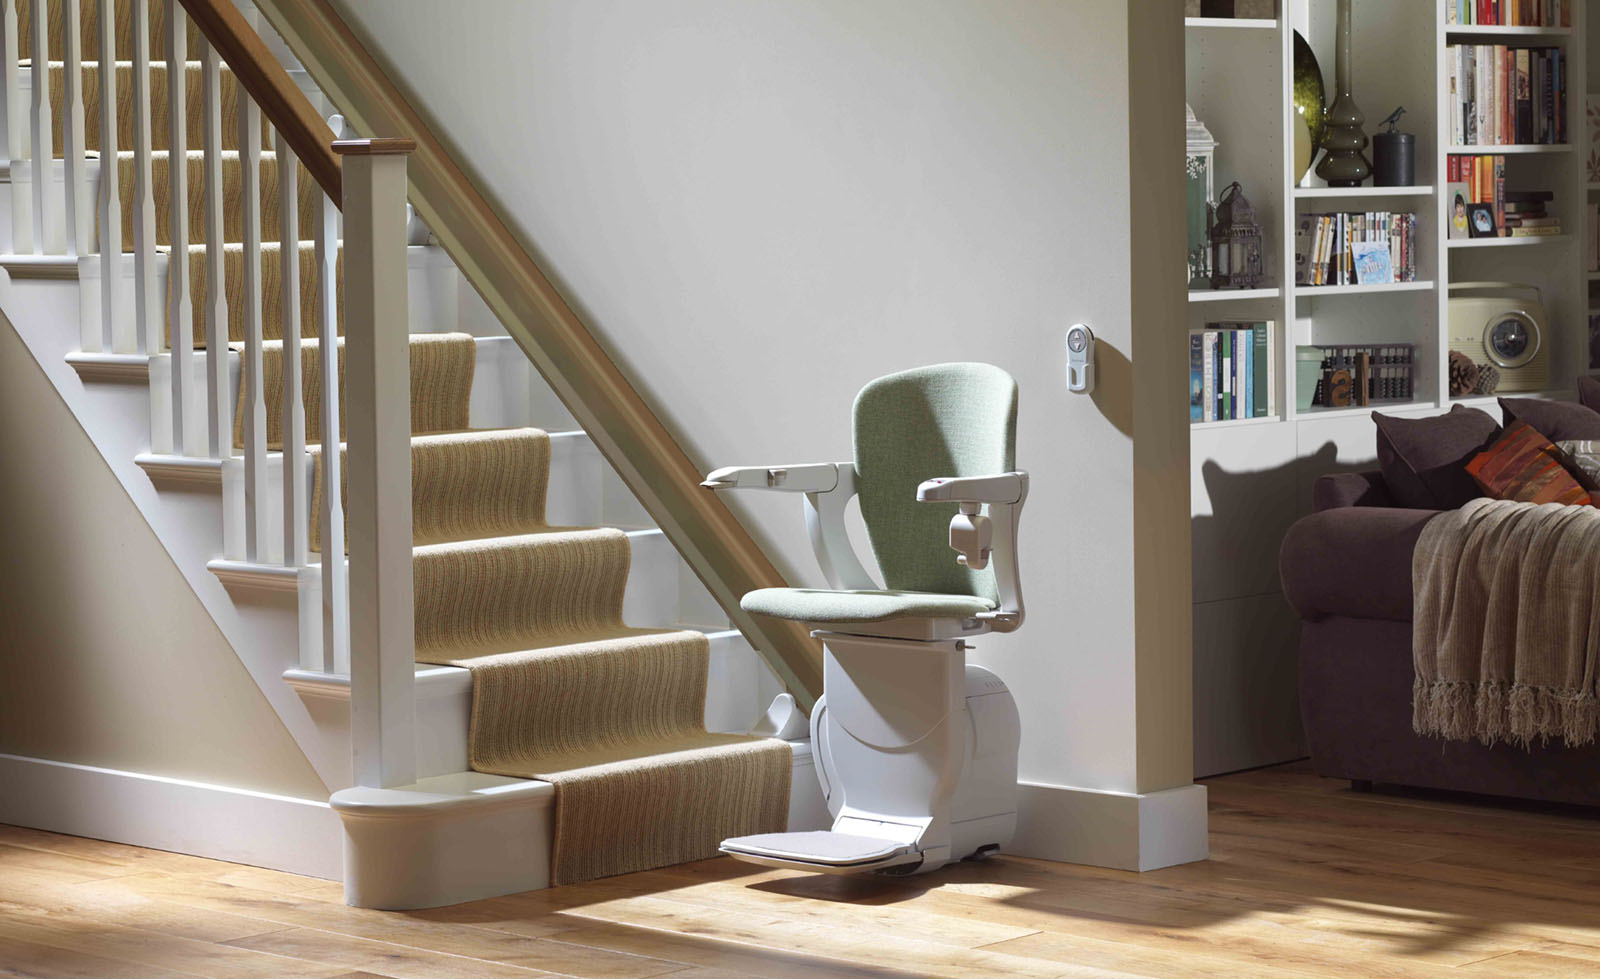 The Main Reasons To Buy a Refurbished Stairlift